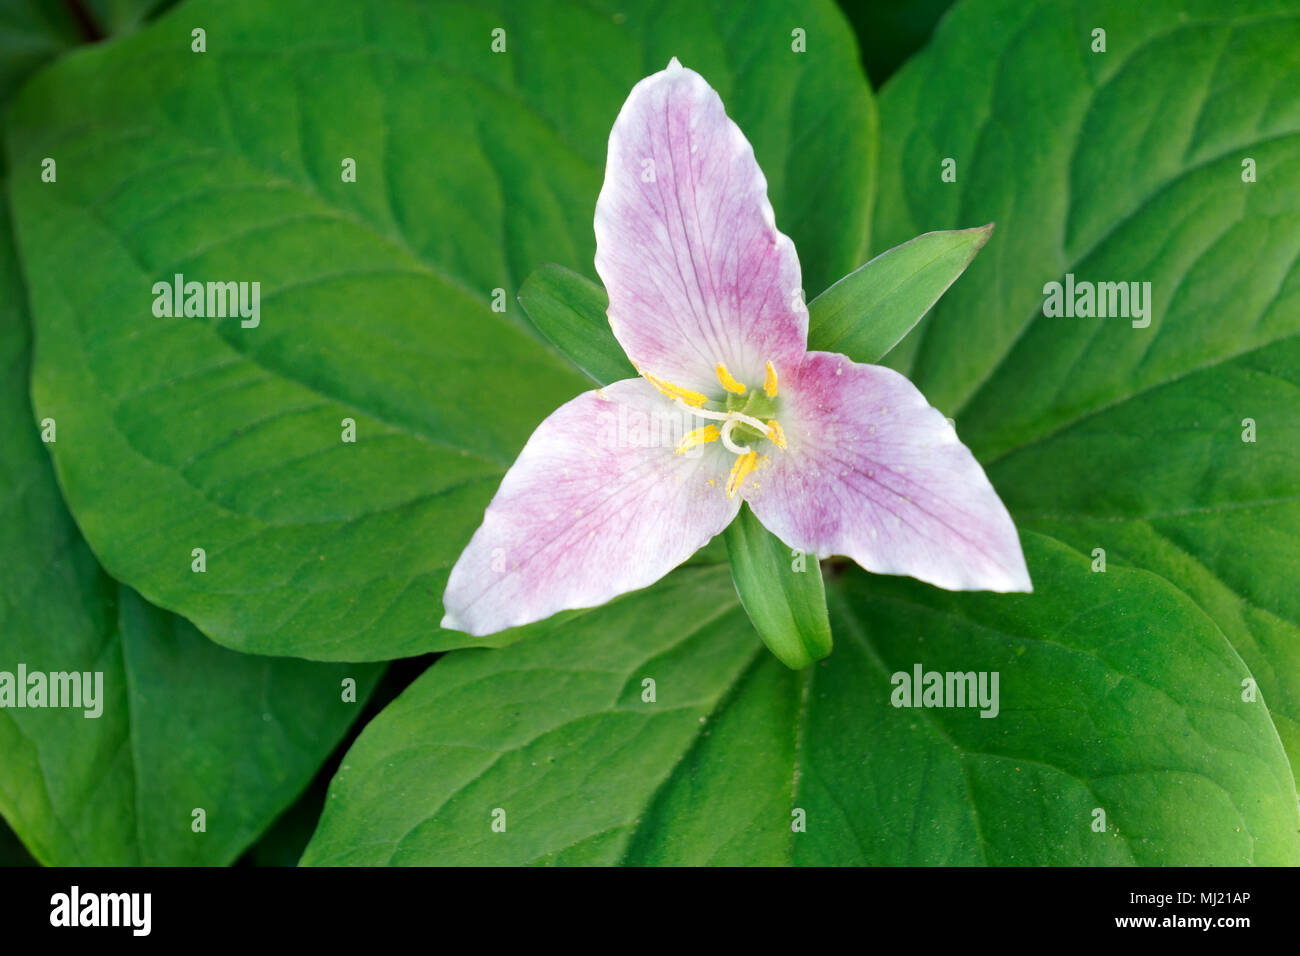 Close up of a Western Trillium (Trillium ovatum) or Wake Robin flower with petals beginning to turn pink, Vancouver, British Columbia, Canada Stock Photo